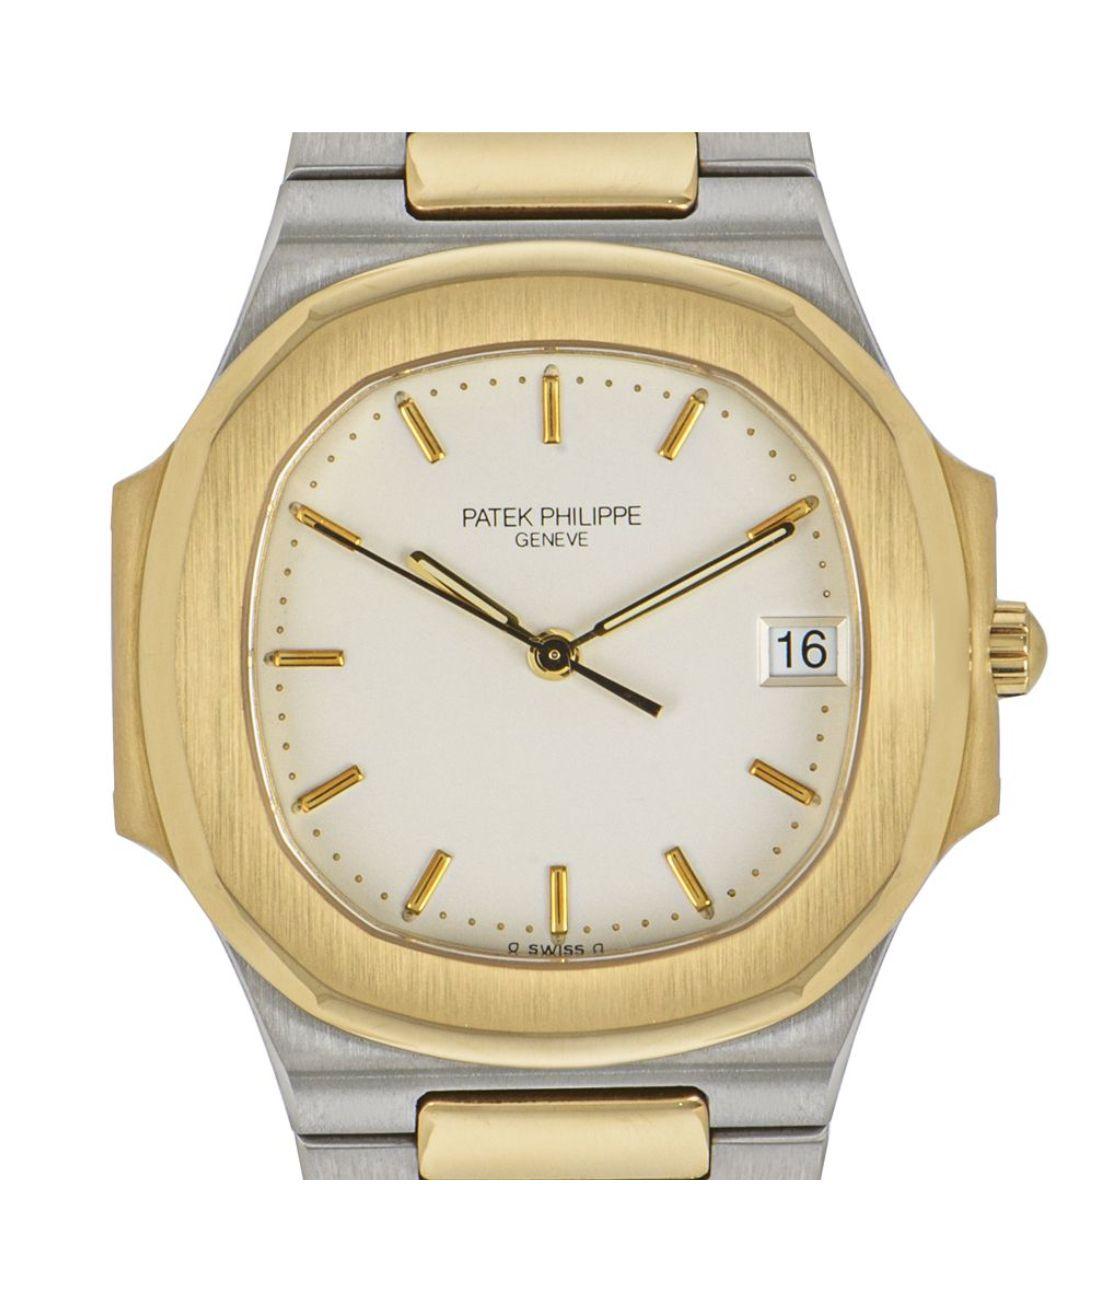 This stainless steel and yellow gold Nautilus from Patek Philippe features a silver dial with a date indicator at 3 o'clock and a fixed gold bezel.

It is equipped with a scratch resistant sapphire crystal, quartz movement and paired with a